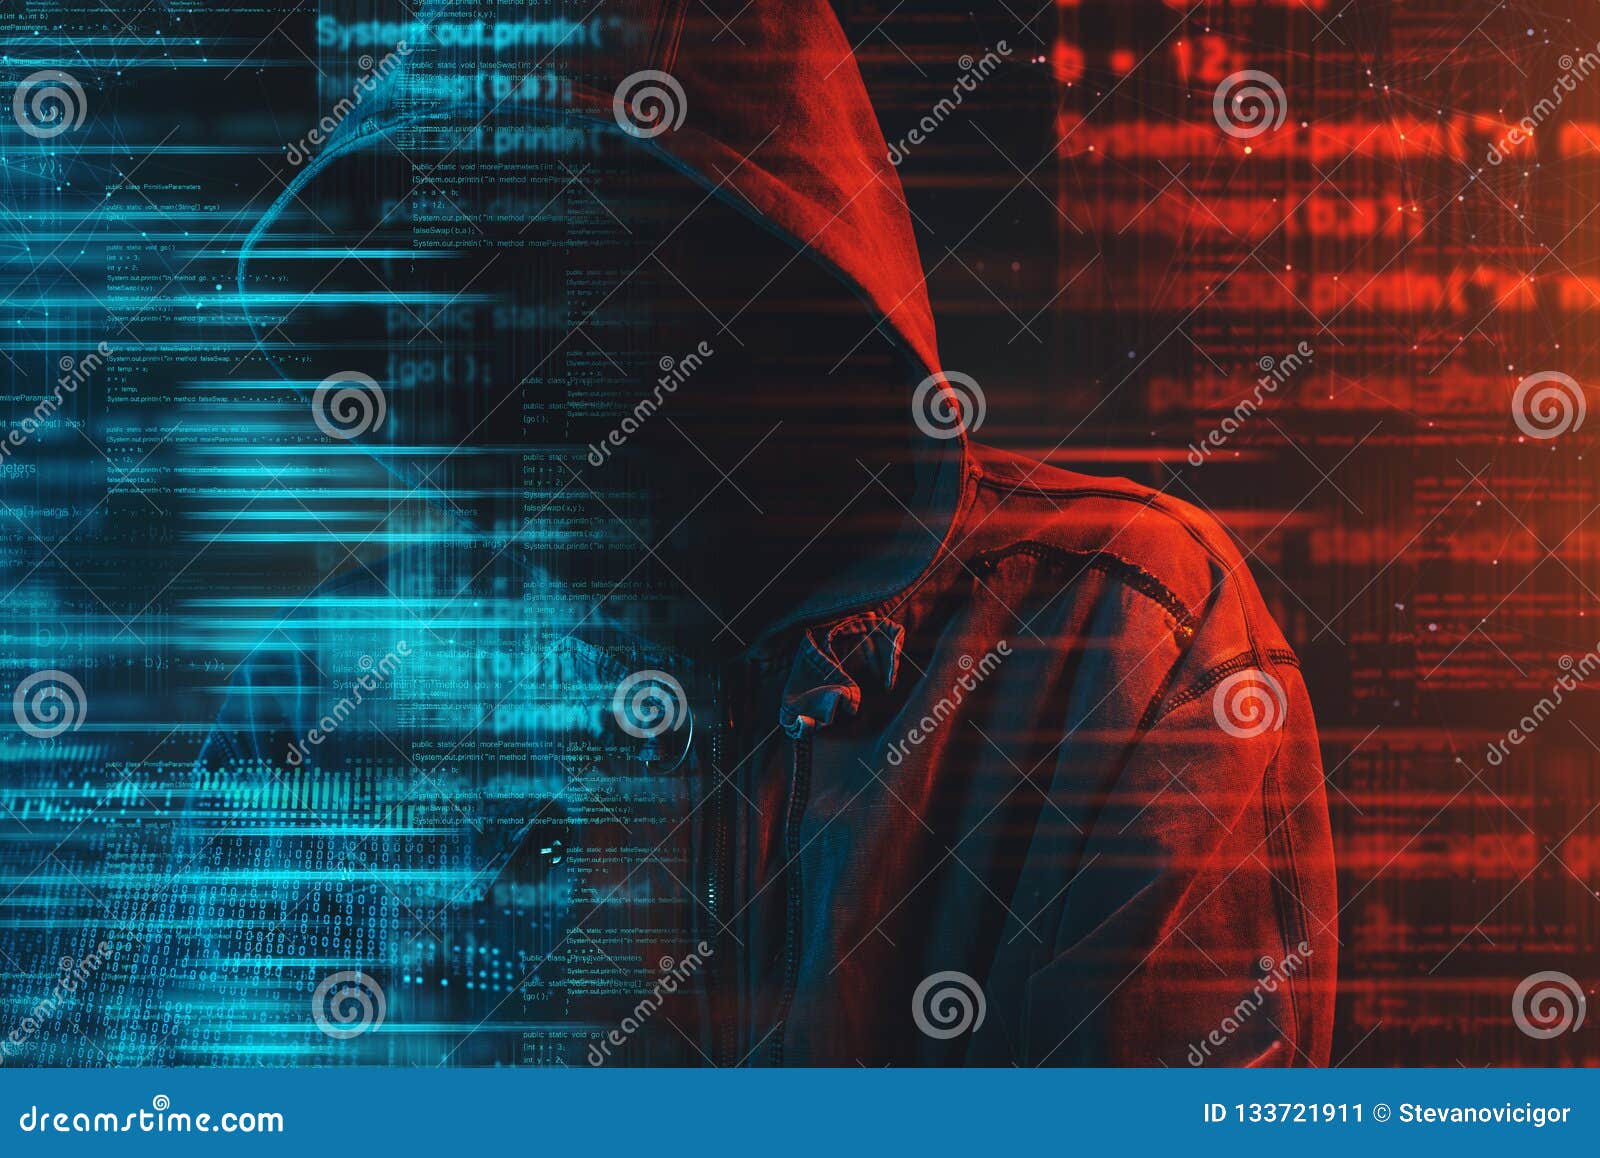 stereotypical image of computer hacker with hoodie and computer